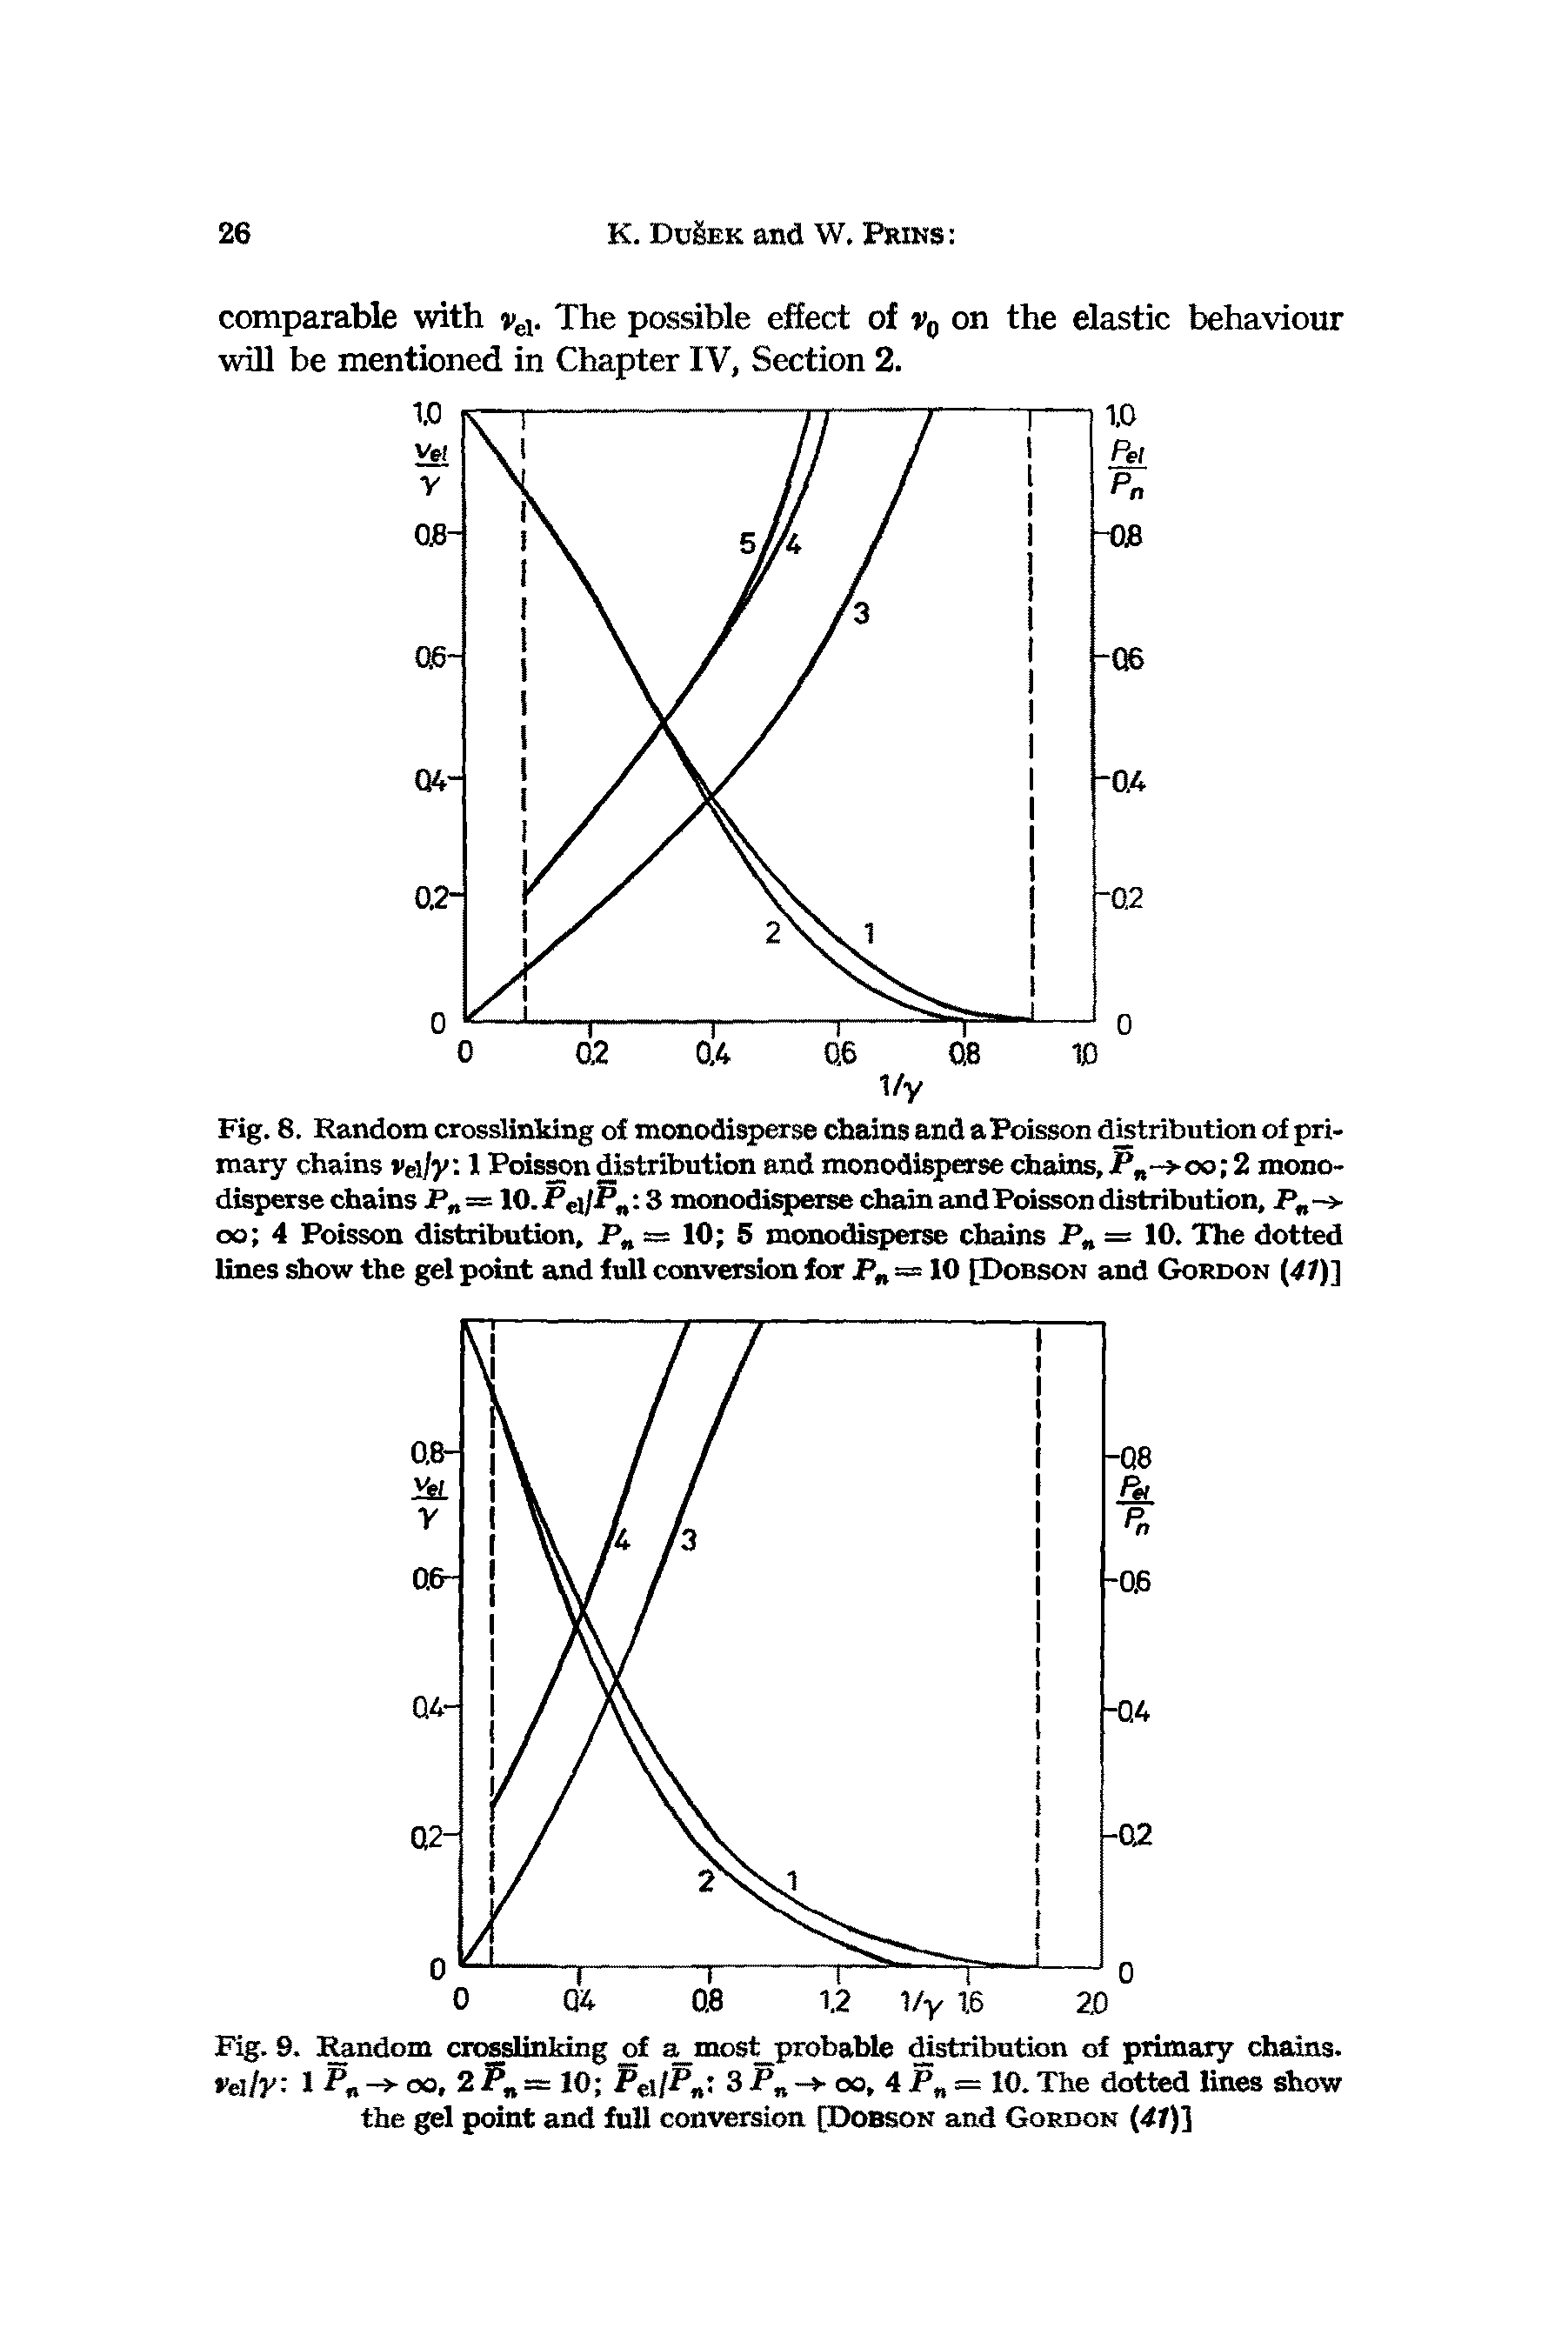 Fig. 8. Random crosslinking of monodisperse chains and aPoisson distribution of primary chains ve jy 1 Poisson distribution and monodisperse chains, Pn- oo 2 monodisperse chains jP = 10.Pci/P 3 monodisperse chain and Poisson distribution, Pn-> oo 4 Poisson distribution, Pn = 10 5 monodisperse chains P = 10. The dotted lines show the gel point and full conversion for Pn = 10 [Dobson and Gordon (4 )]...